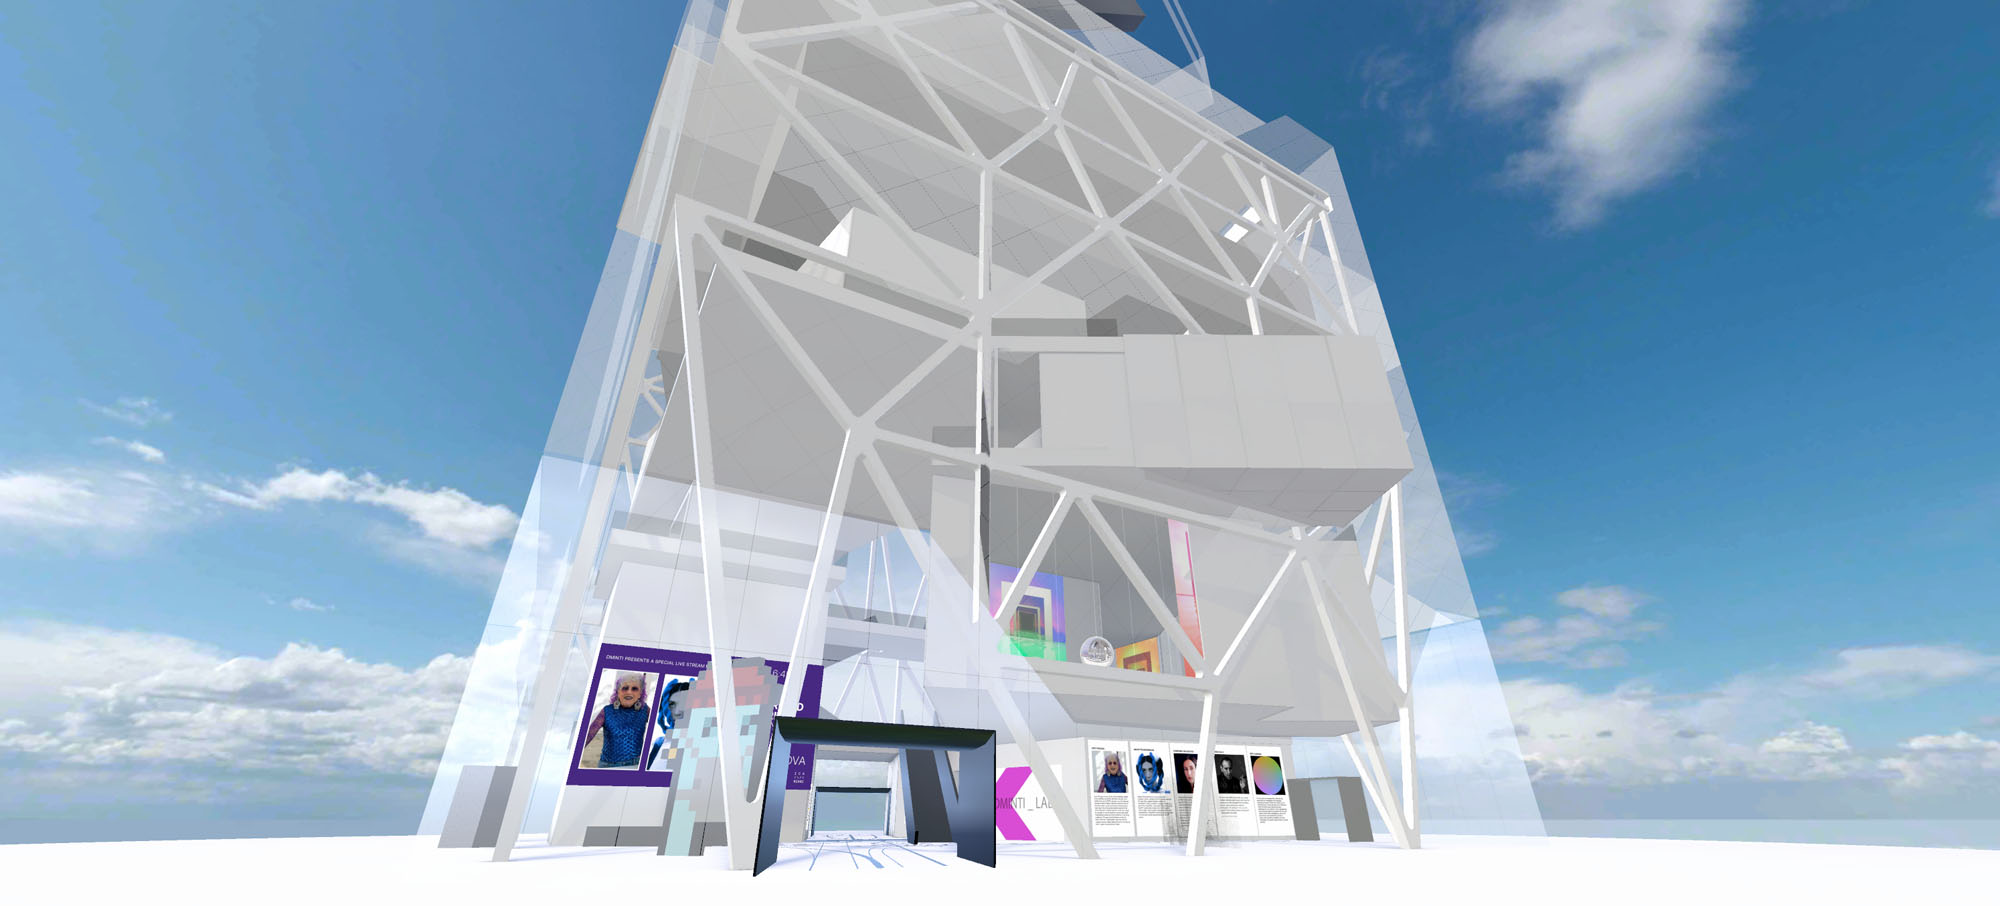 a rendering of the exterior of the Dminti metaverse art museum building